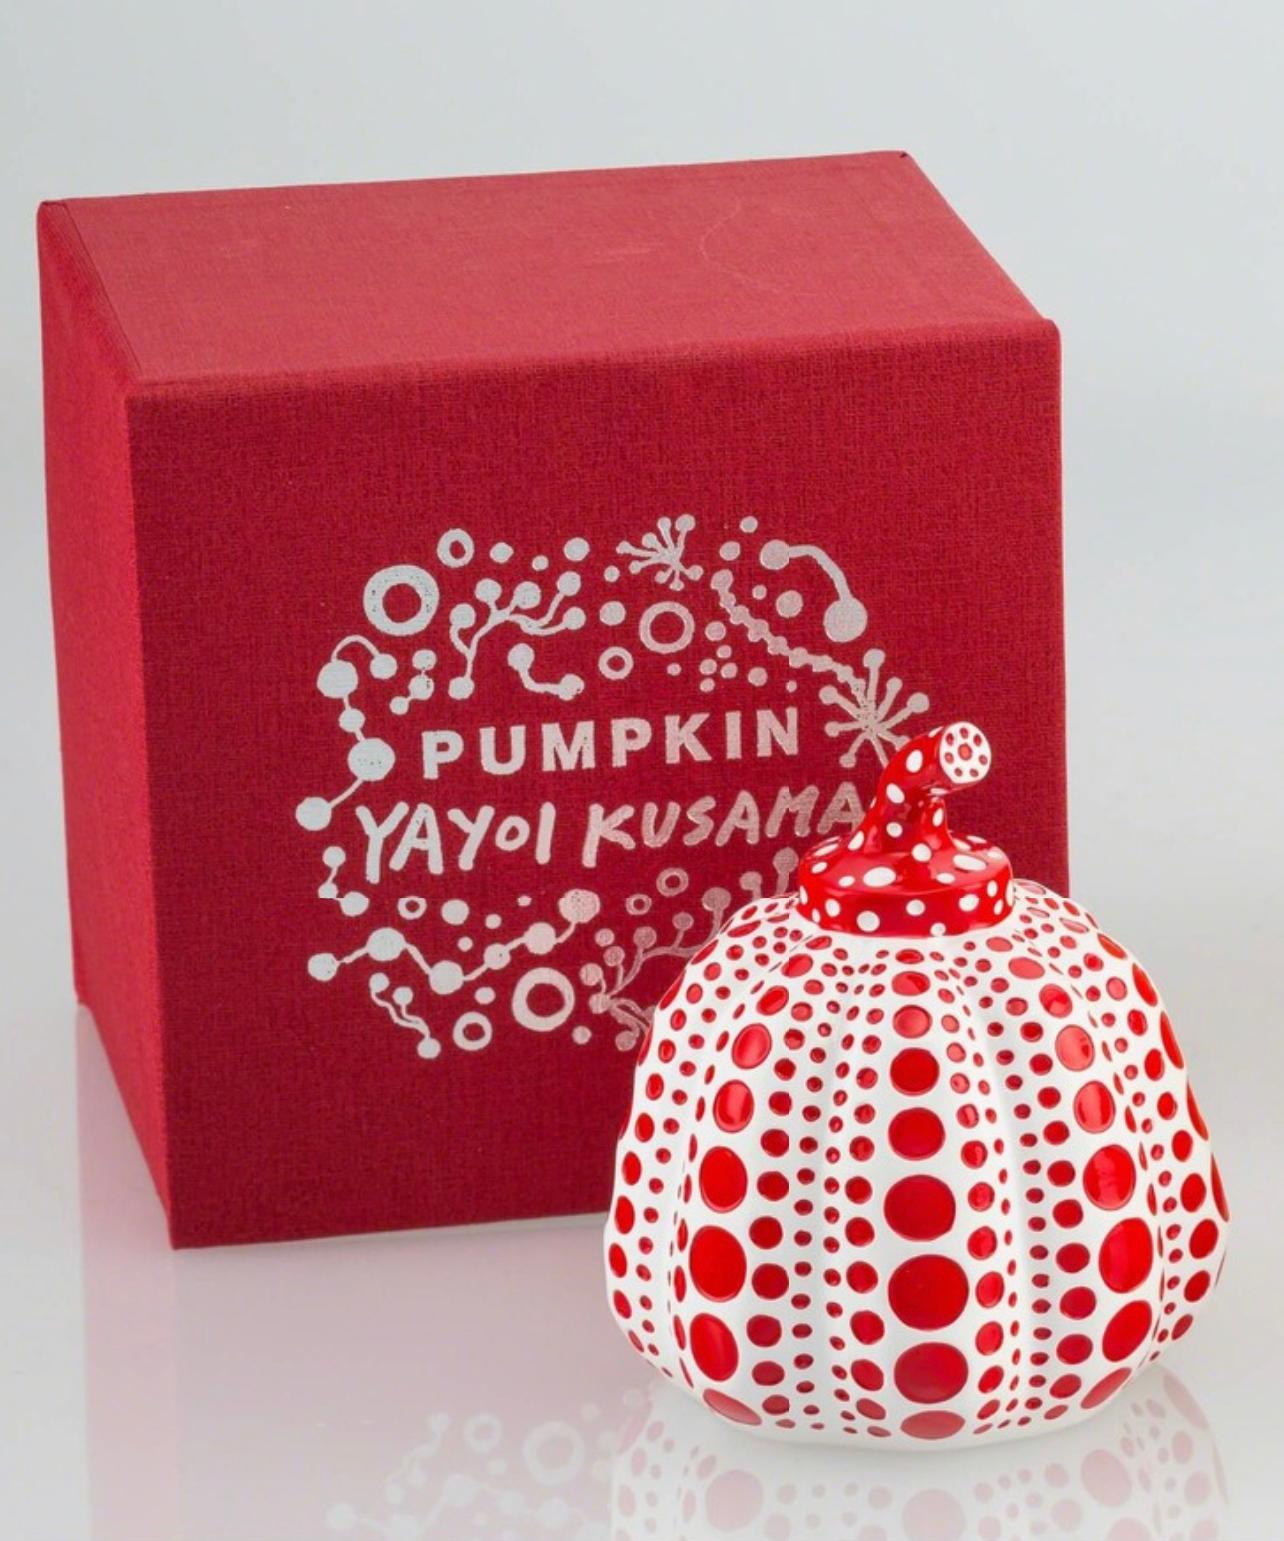 Pumpkins (Yellow & Black & Red & White) Two Painted Sculptures Yayoi Kusama 1